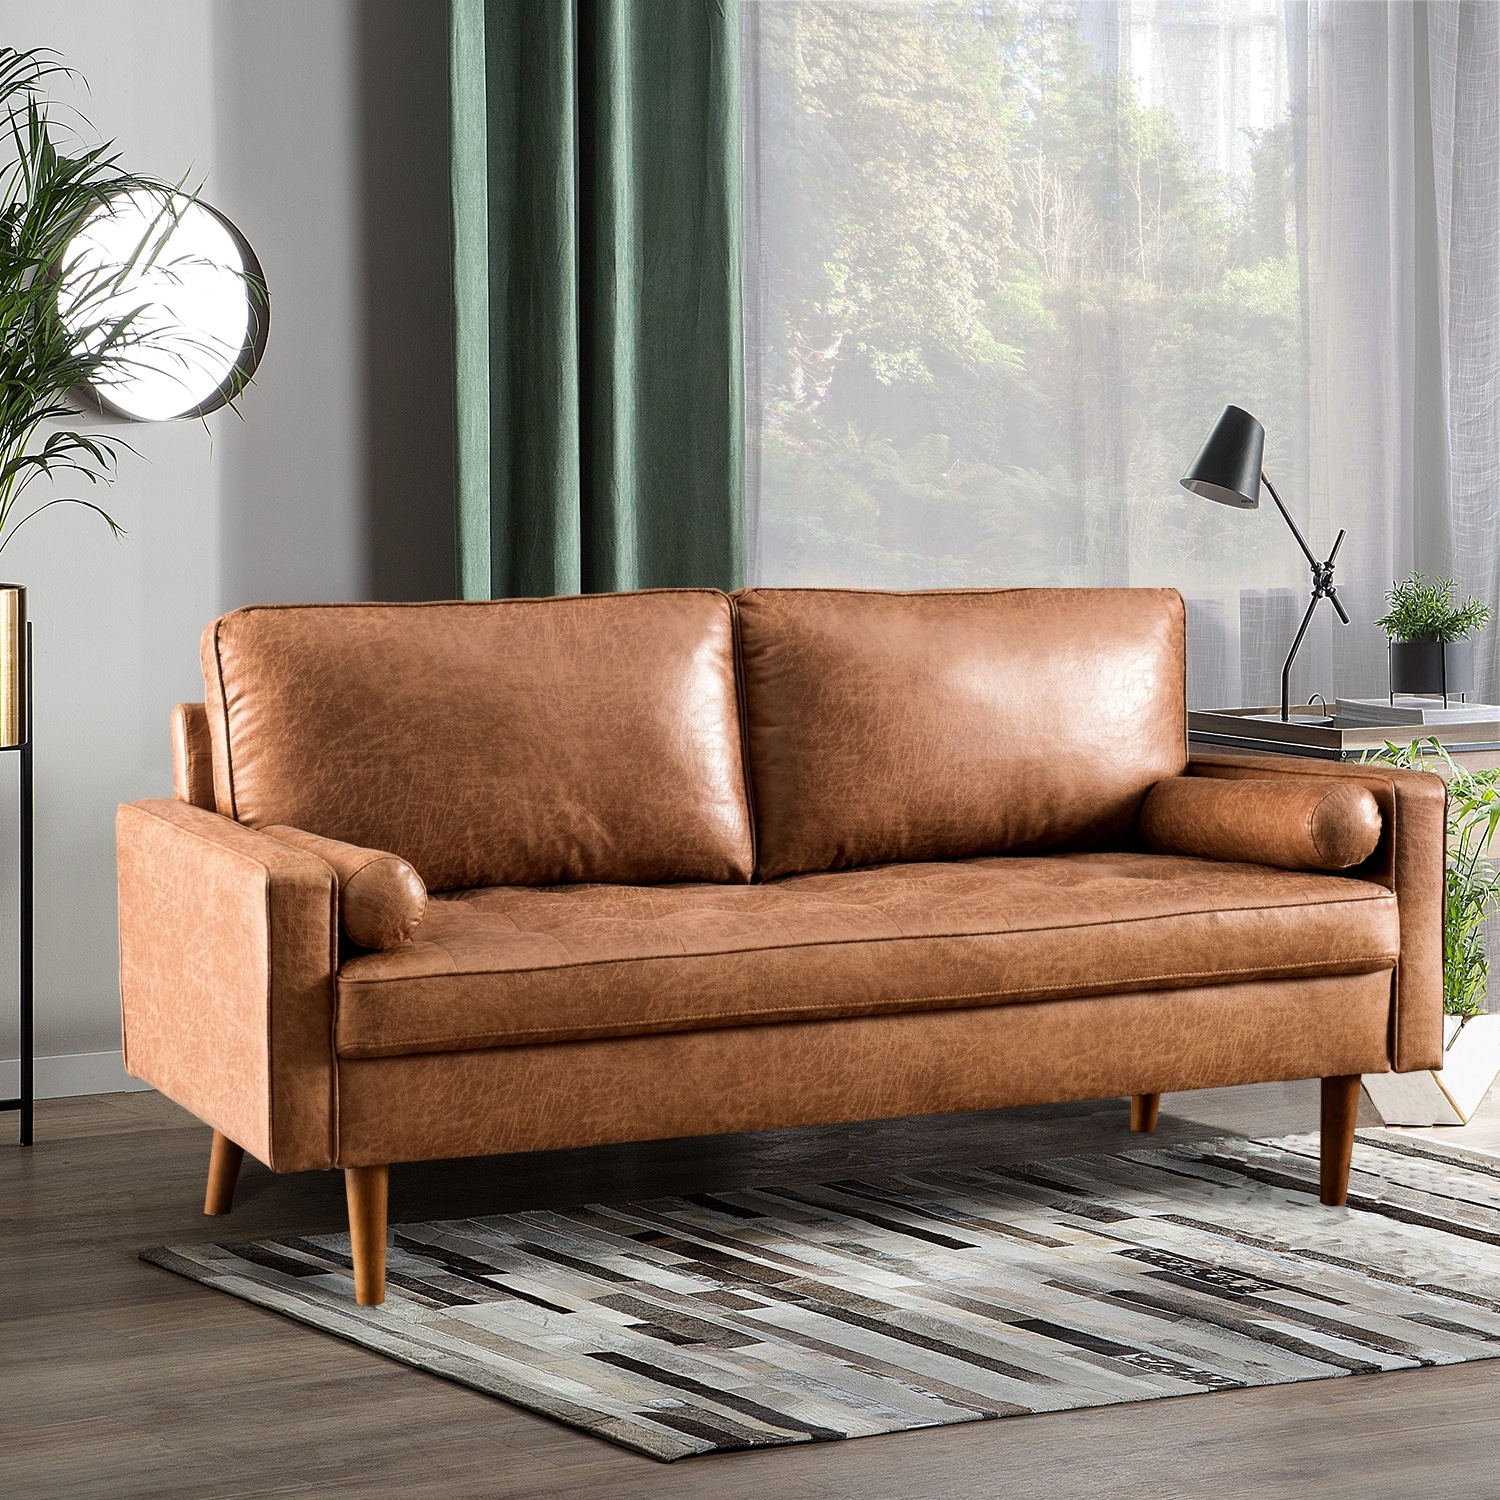 Ernest Shackleton Person med ansvar for sportsspil forfremmelse OVIOS Mid-Century Top-Grain SUEDE Leather Deep Seat Sofa With Cushions Wood  Legs - On Sale - Bed Bath & Beyond - 32300648